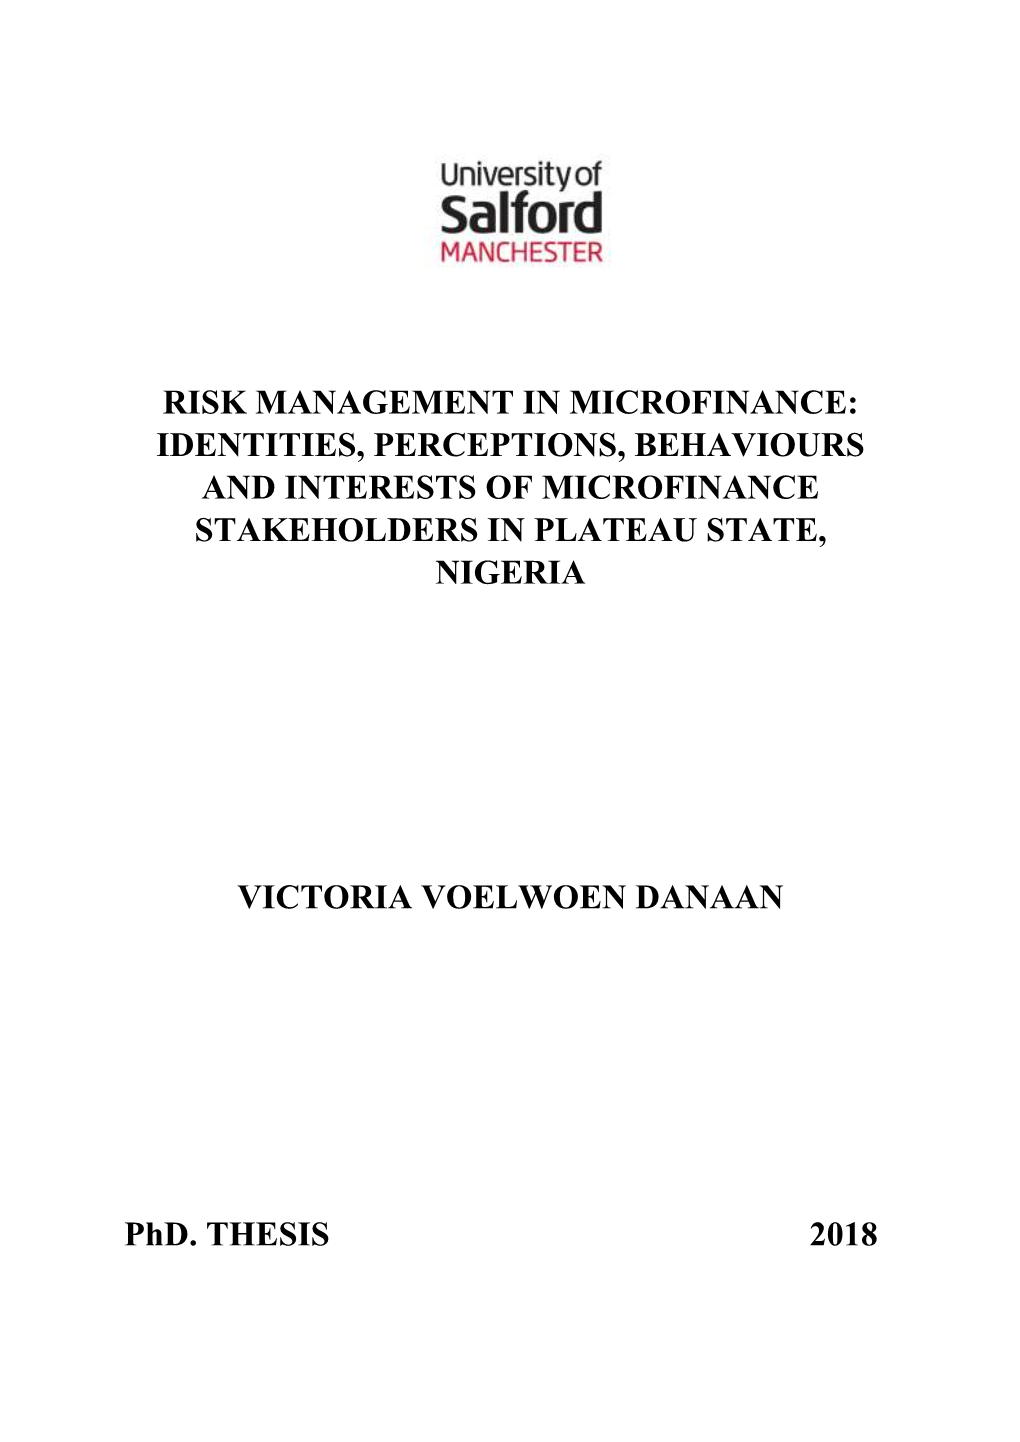 Risk Management in Microfinance: Identities, Perceptions, Behaviours and Interests of Microfinance Stakeholders in Plateau State, Nigeria